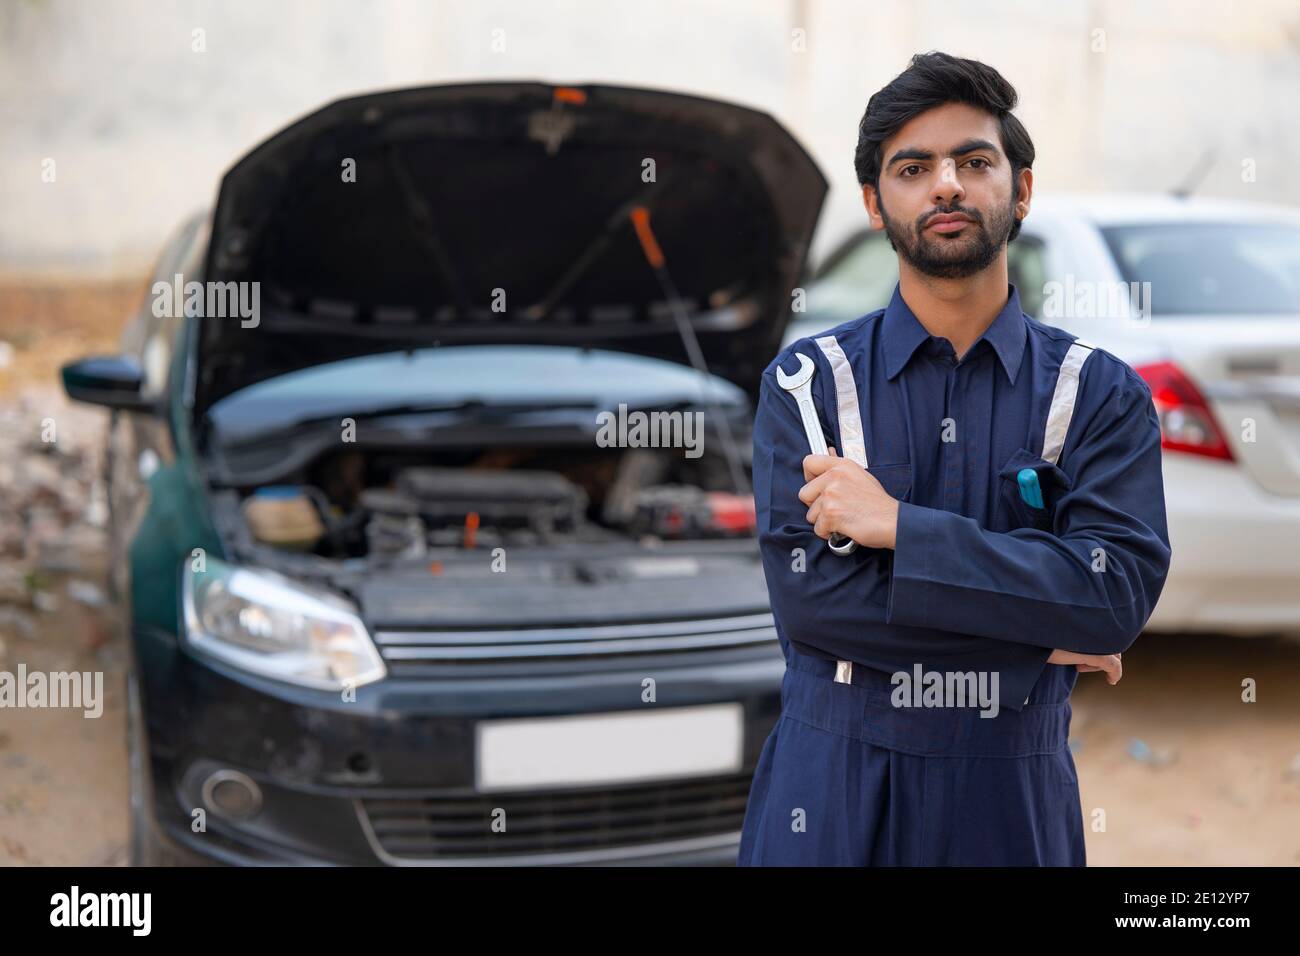 A YOUNG MECHANIC HOLDING TOOLS STANDING IN FRONT OF AN OPEN CAR Stock Photo